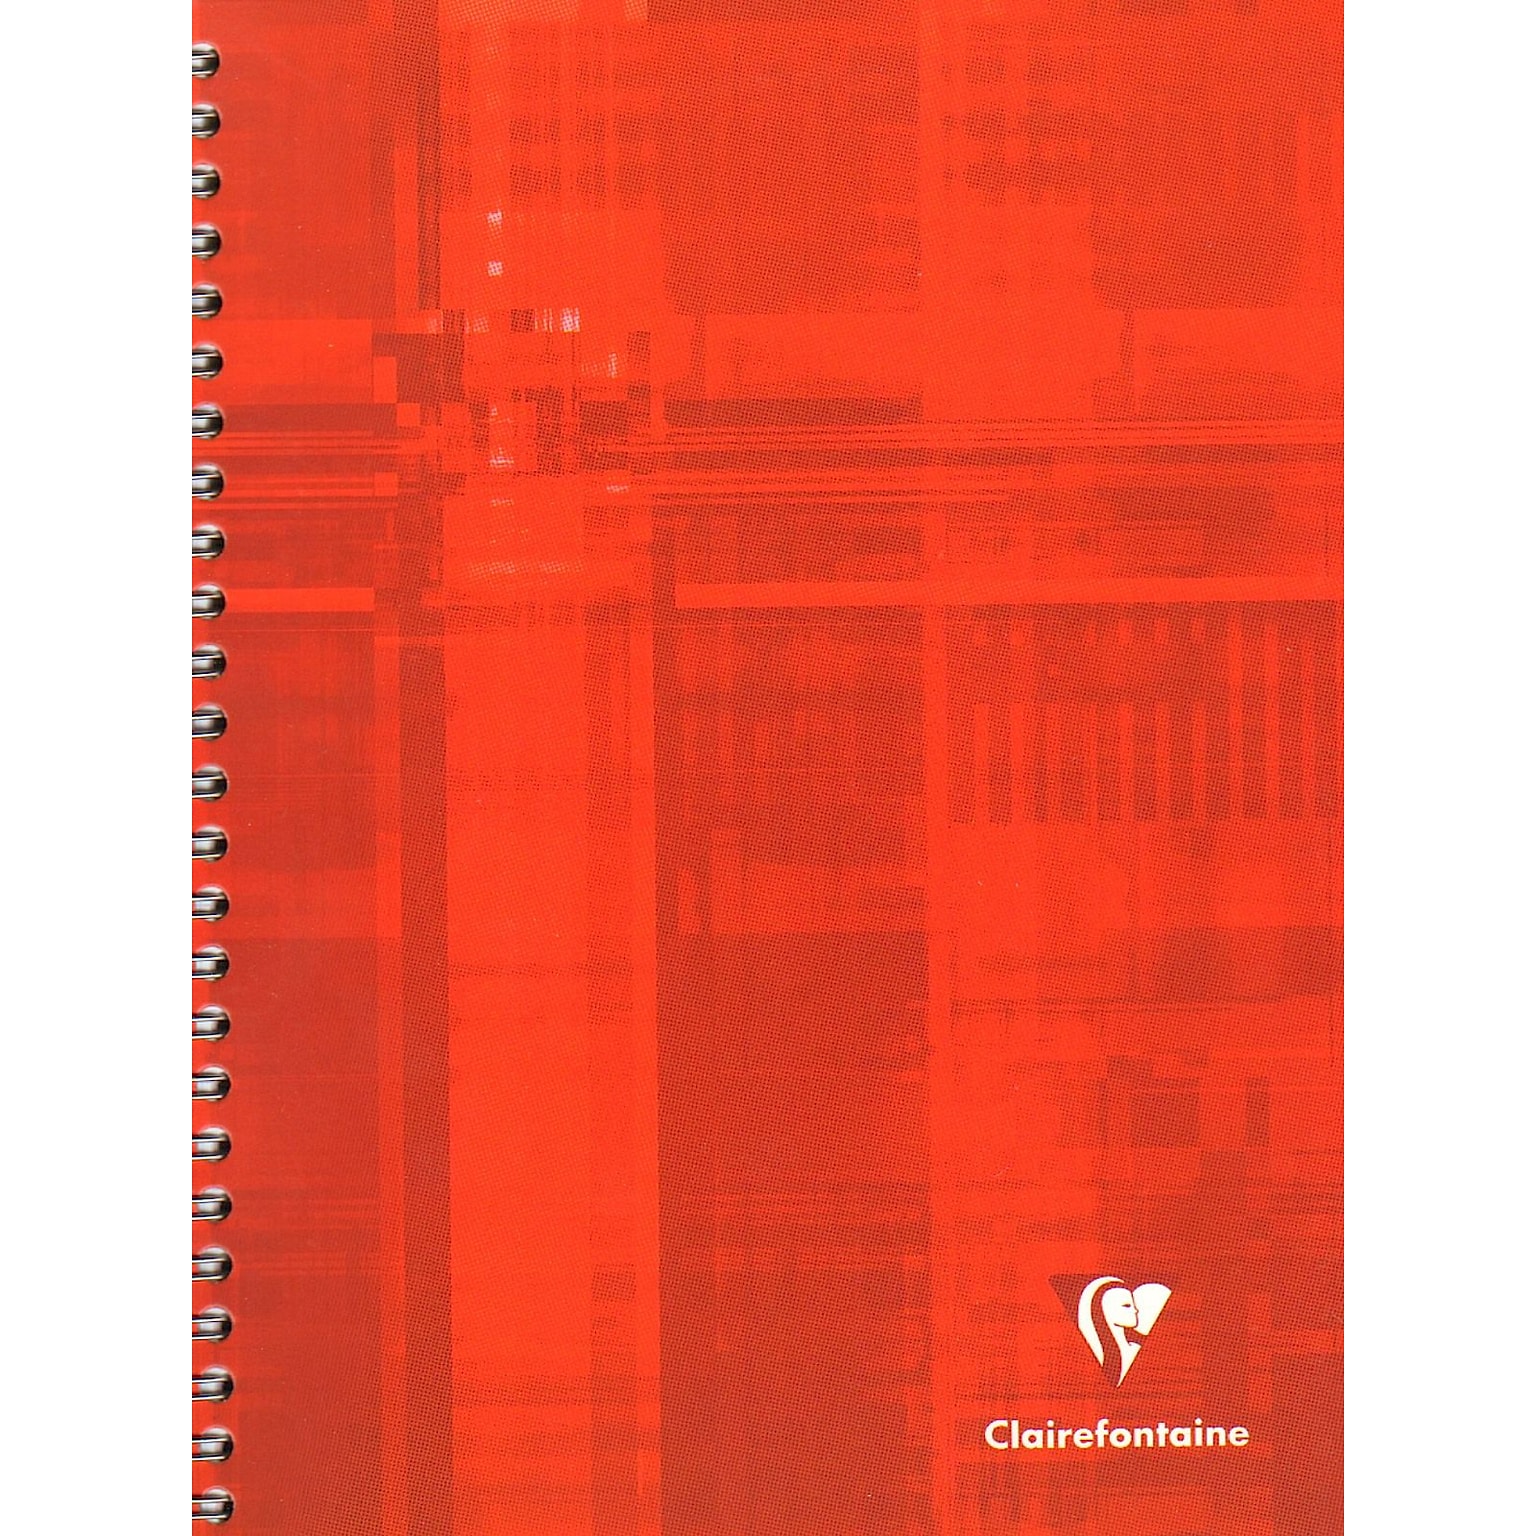 Clairefontaine Subject Notebooks, 6.75 x 8.625, Quad, 75 Sheets, Orange, 2/Pack (26703-PK2)